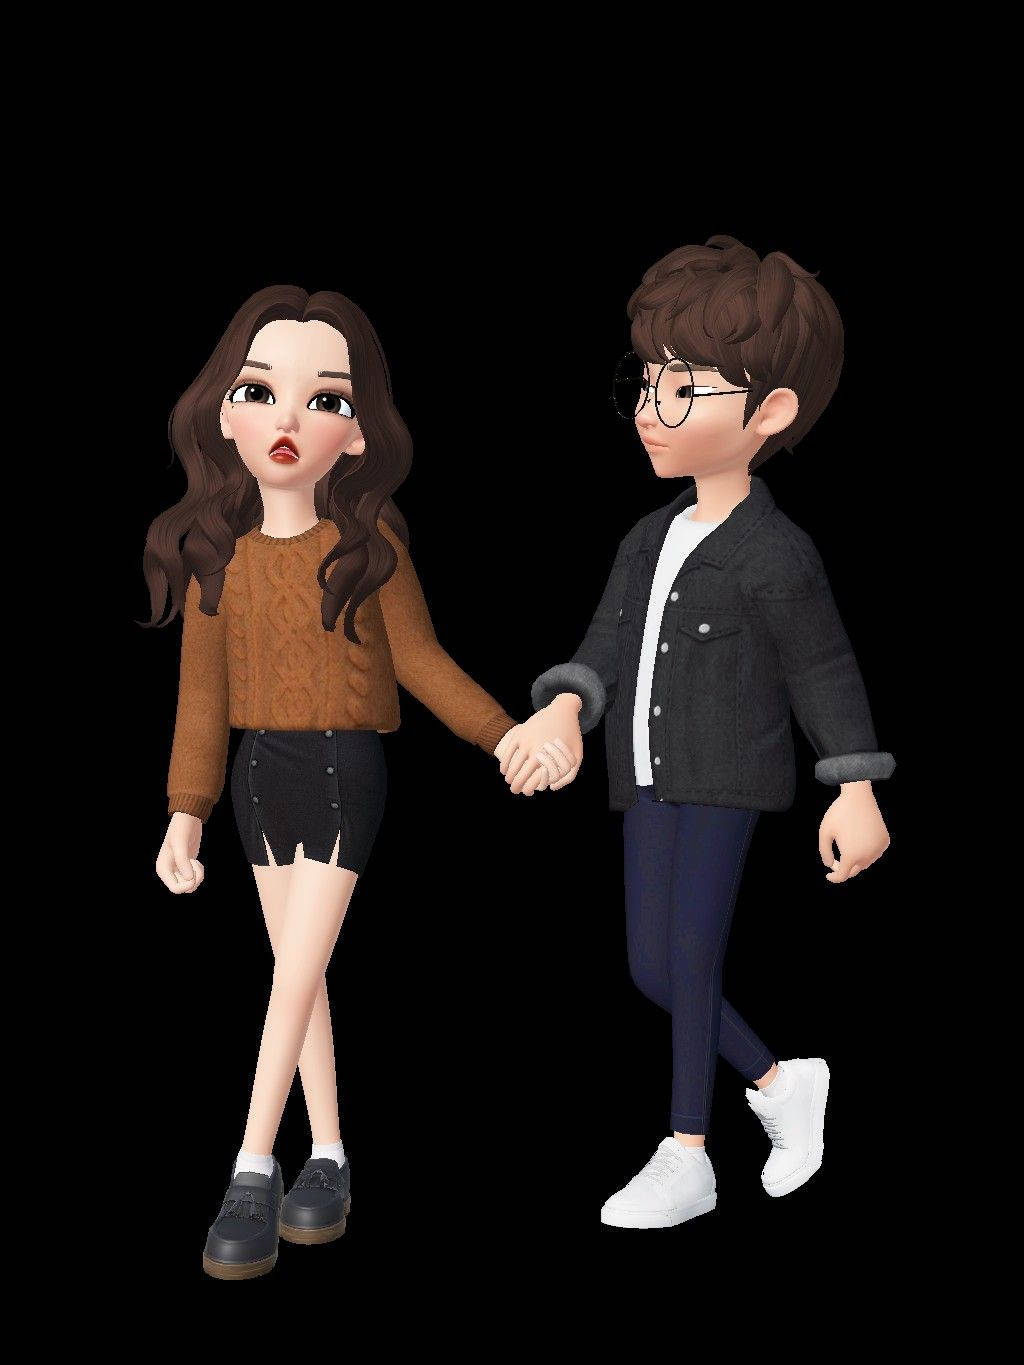 Adorable Cartoon Boy In Zepeto Couple Holding Hands